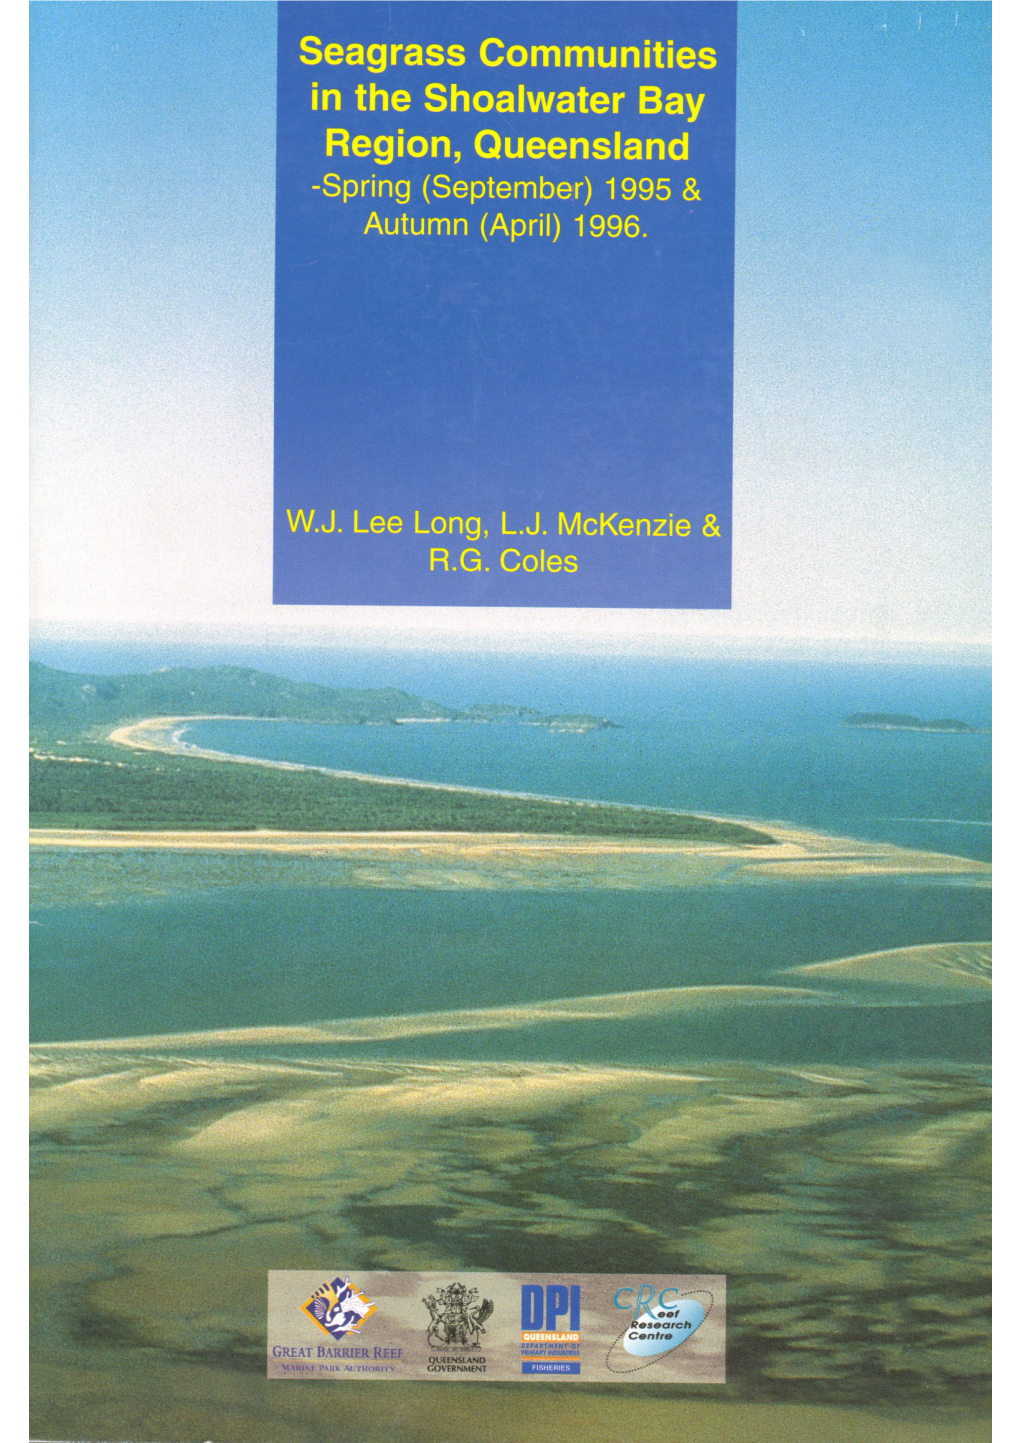 Seagrass Communities in the Shoalwater Bay Region, Queensland - Spring (September) 1995 & Autumn (April) 1996